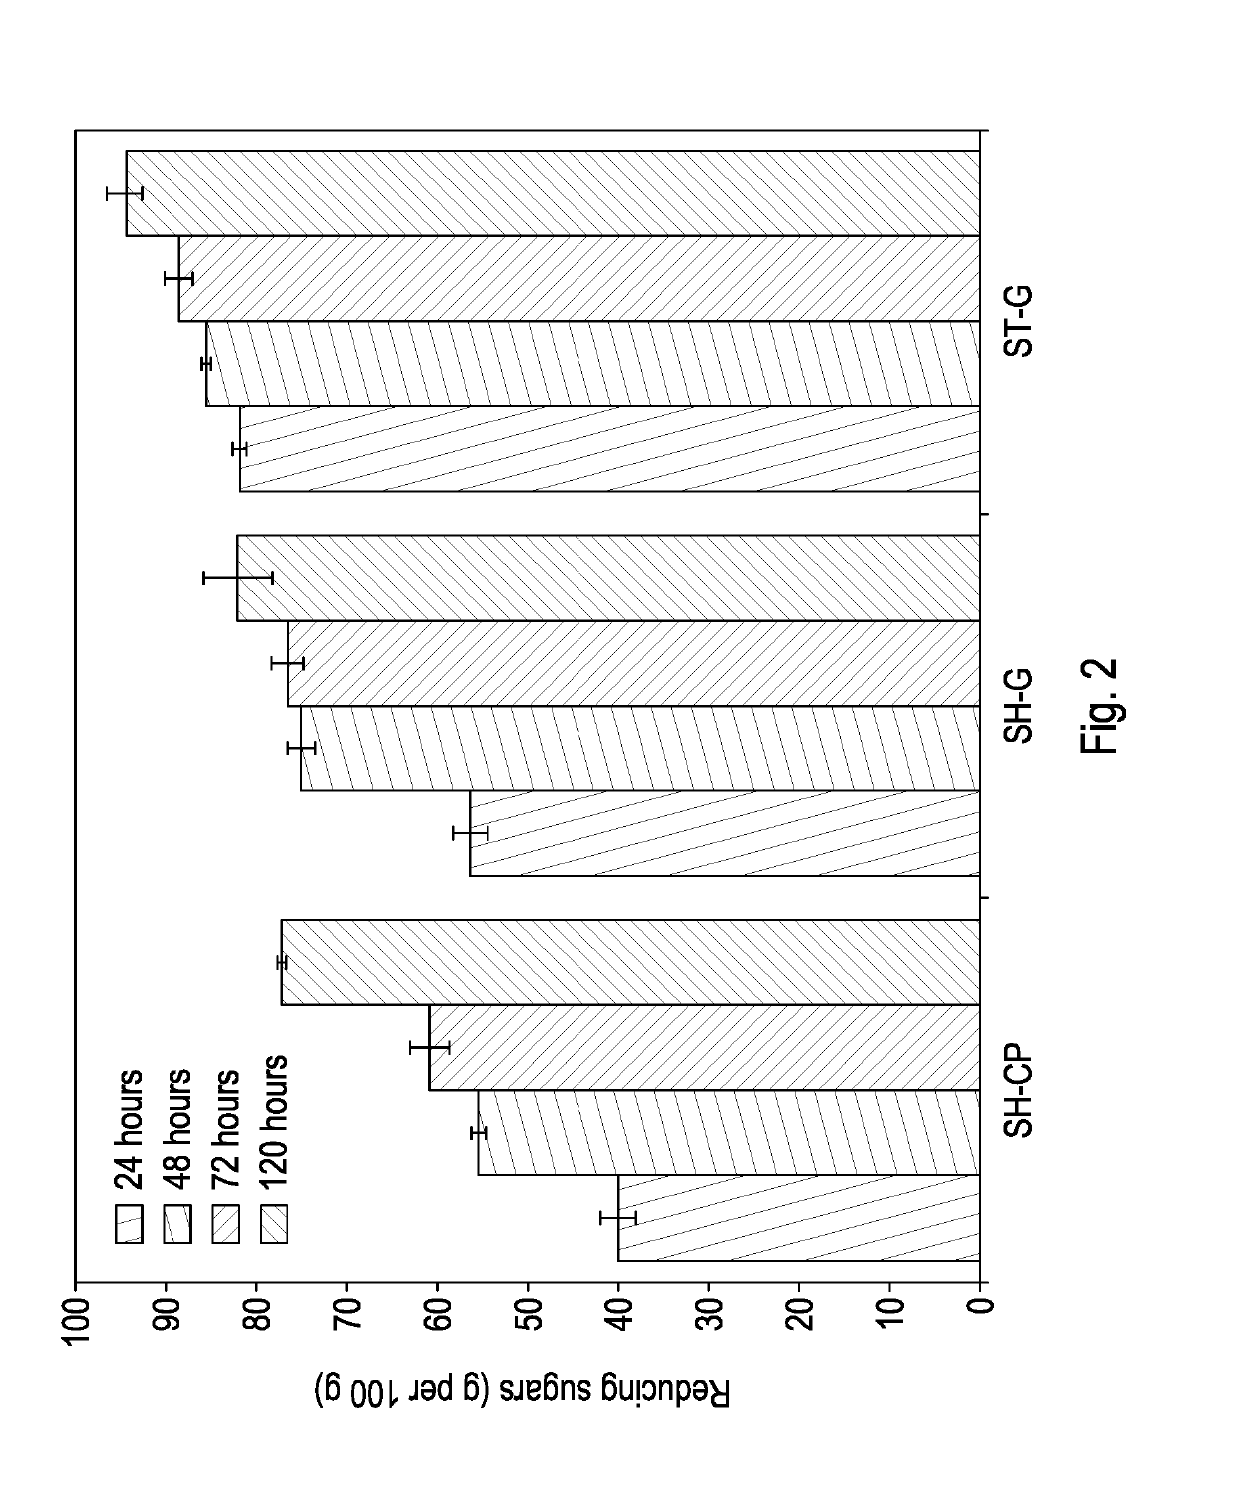 Modified lignin and separation methods